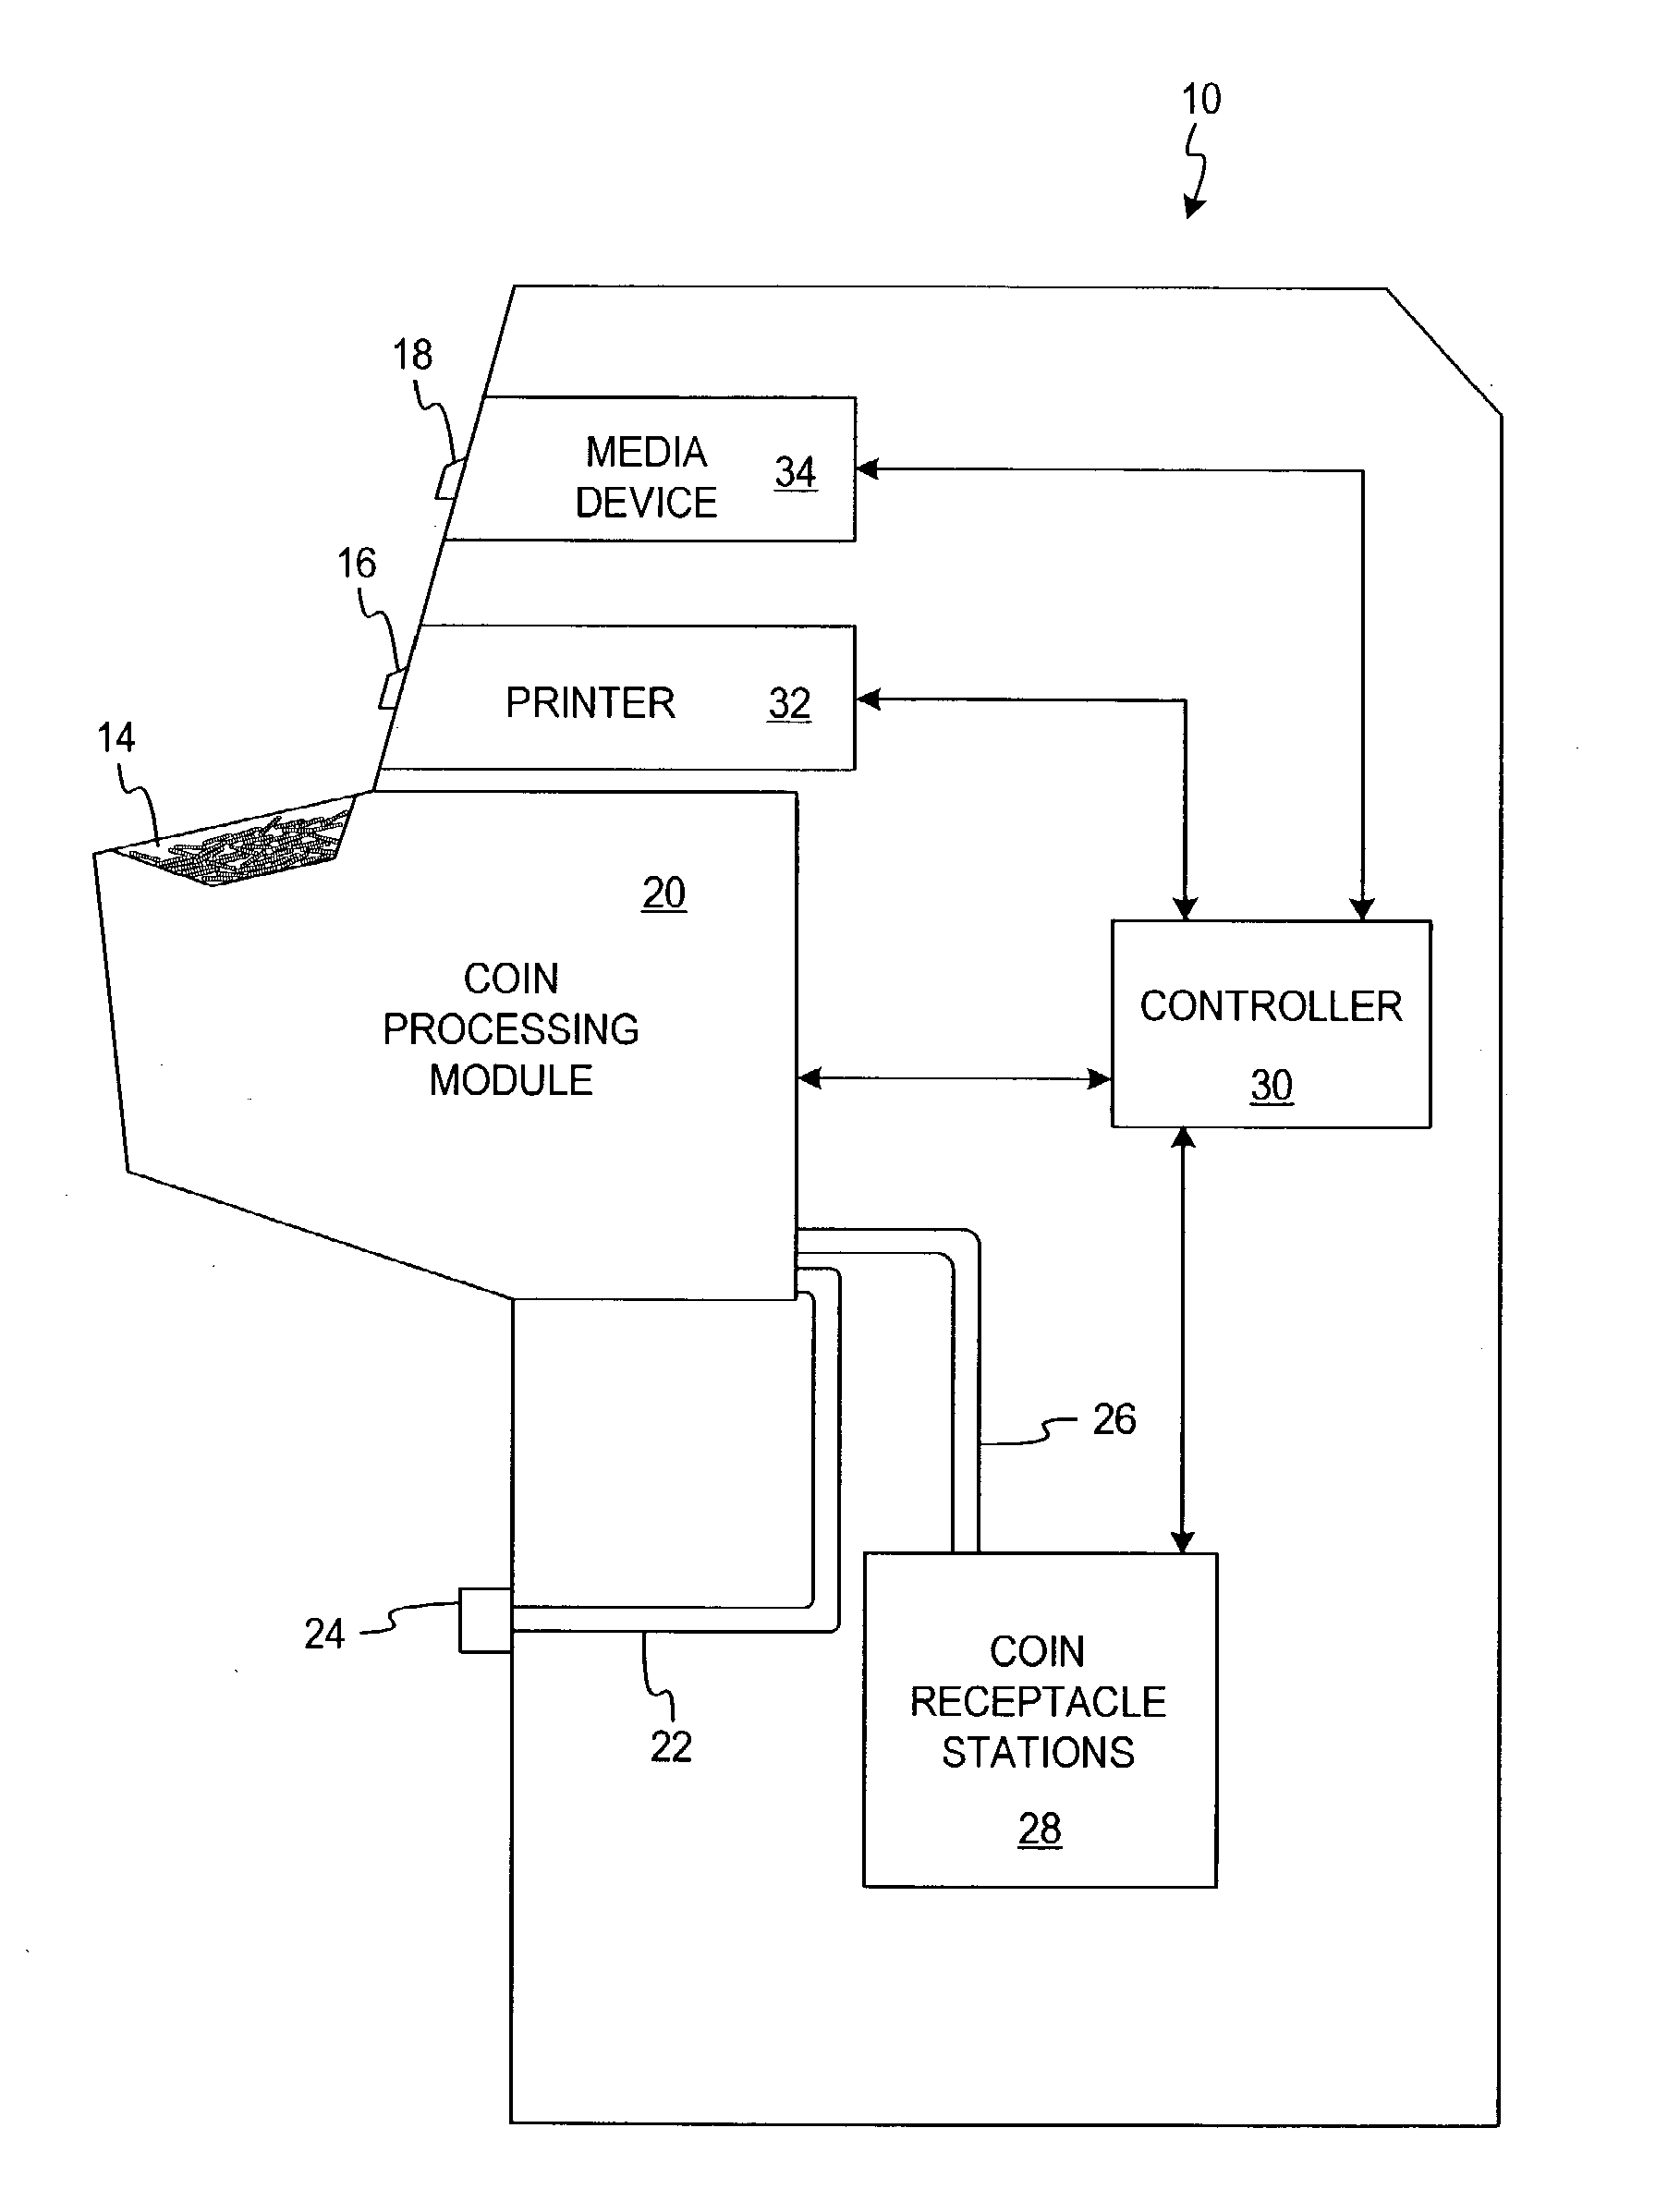 Coin redemption machine having gravity feed coin input tray and foreign object detection system